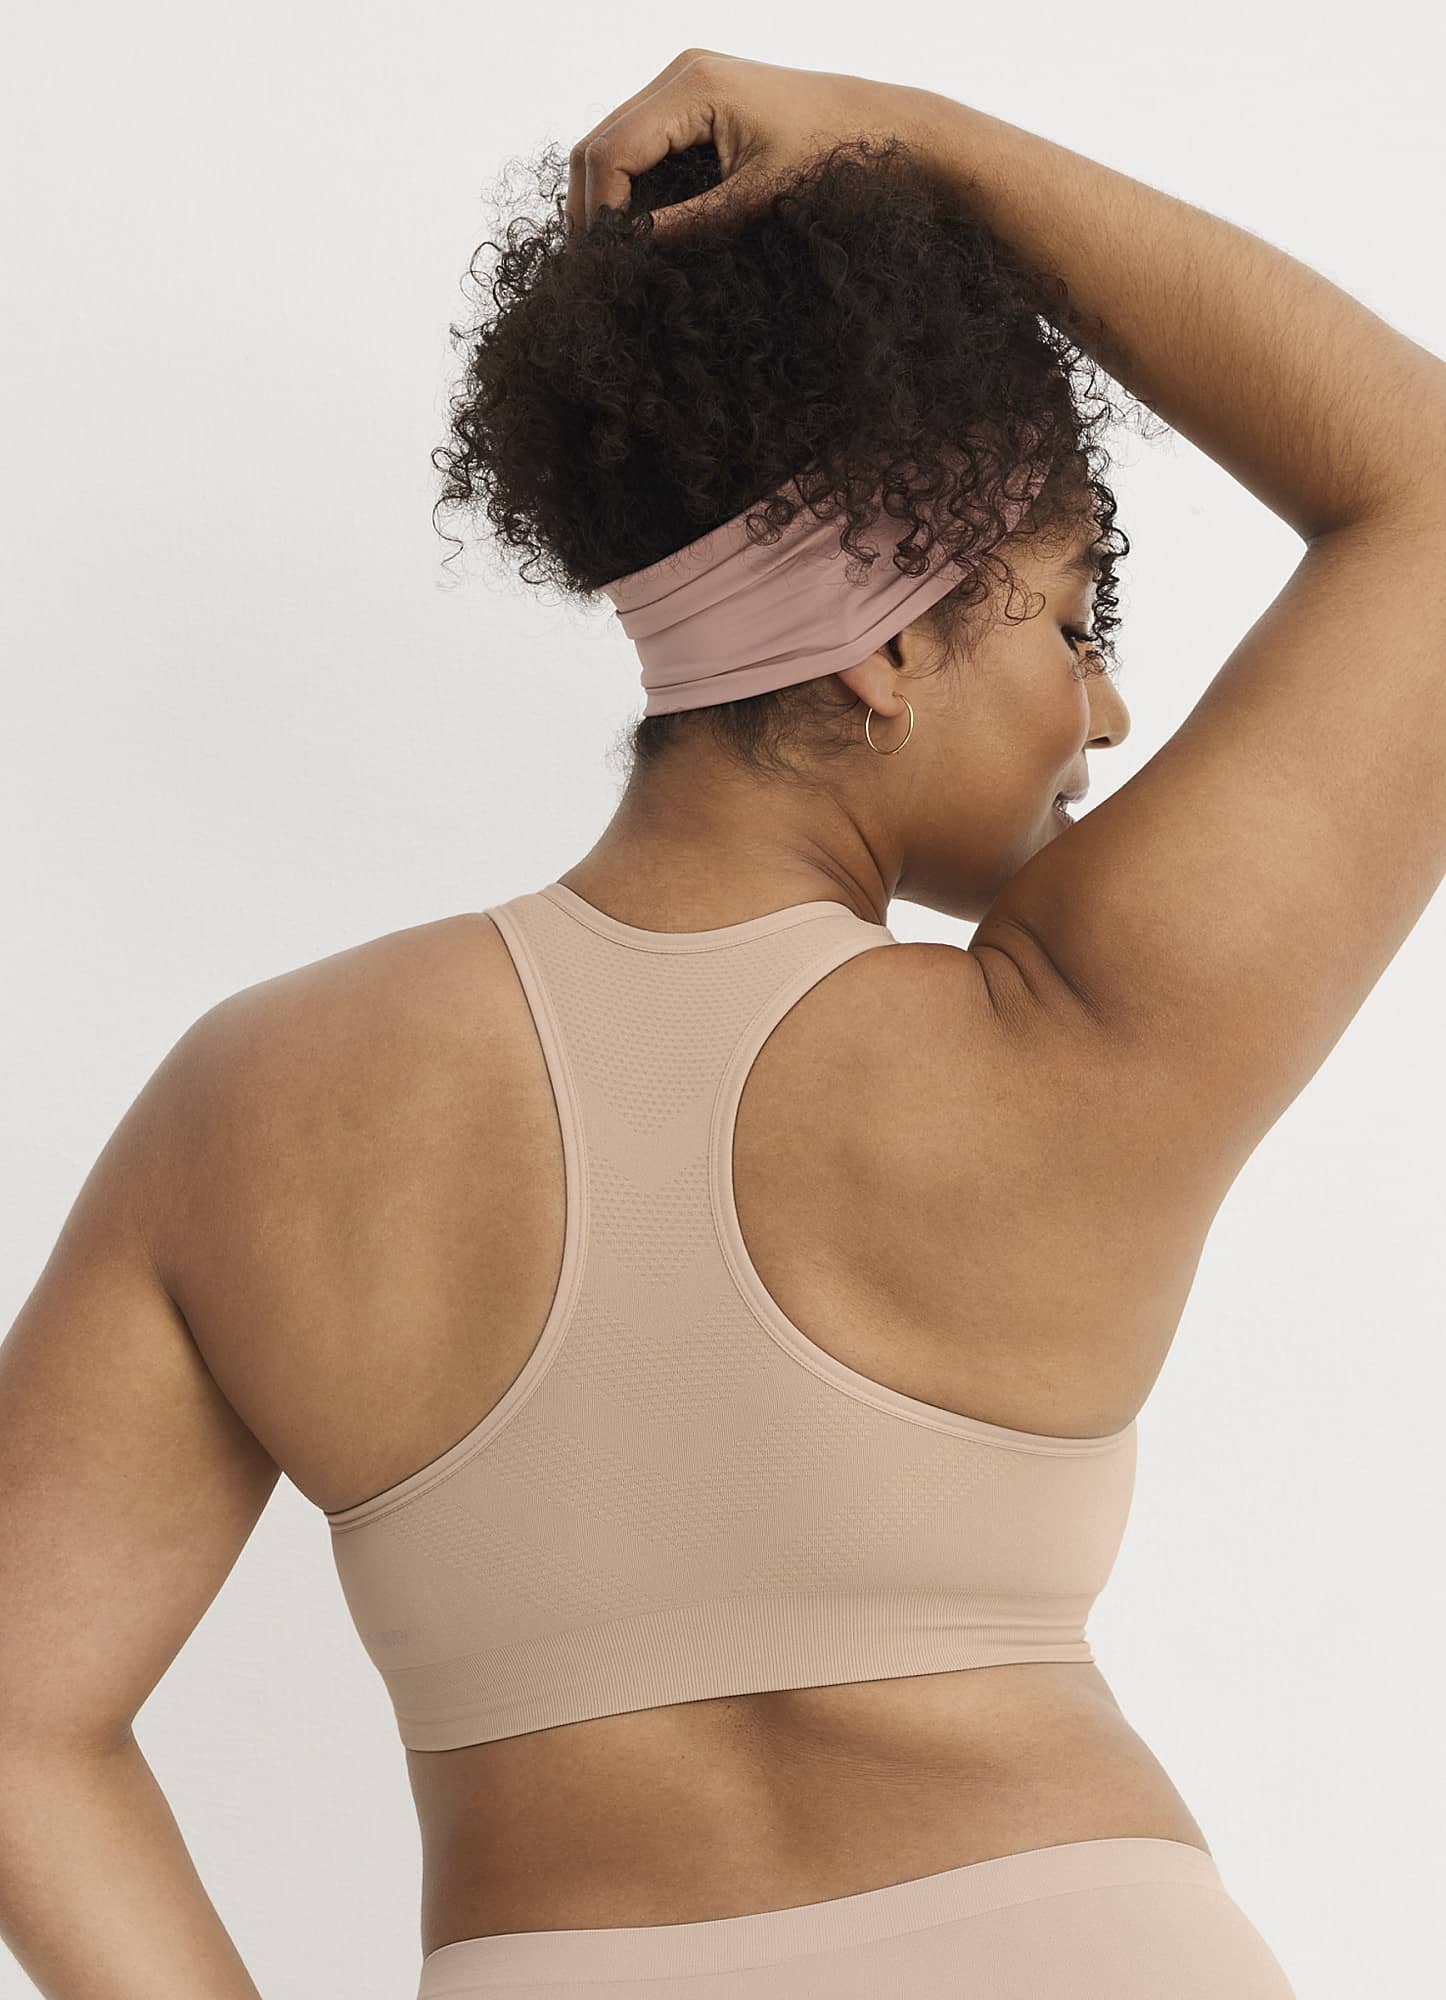 The Lea Cooling Low-Impact Racerback Sports Bra